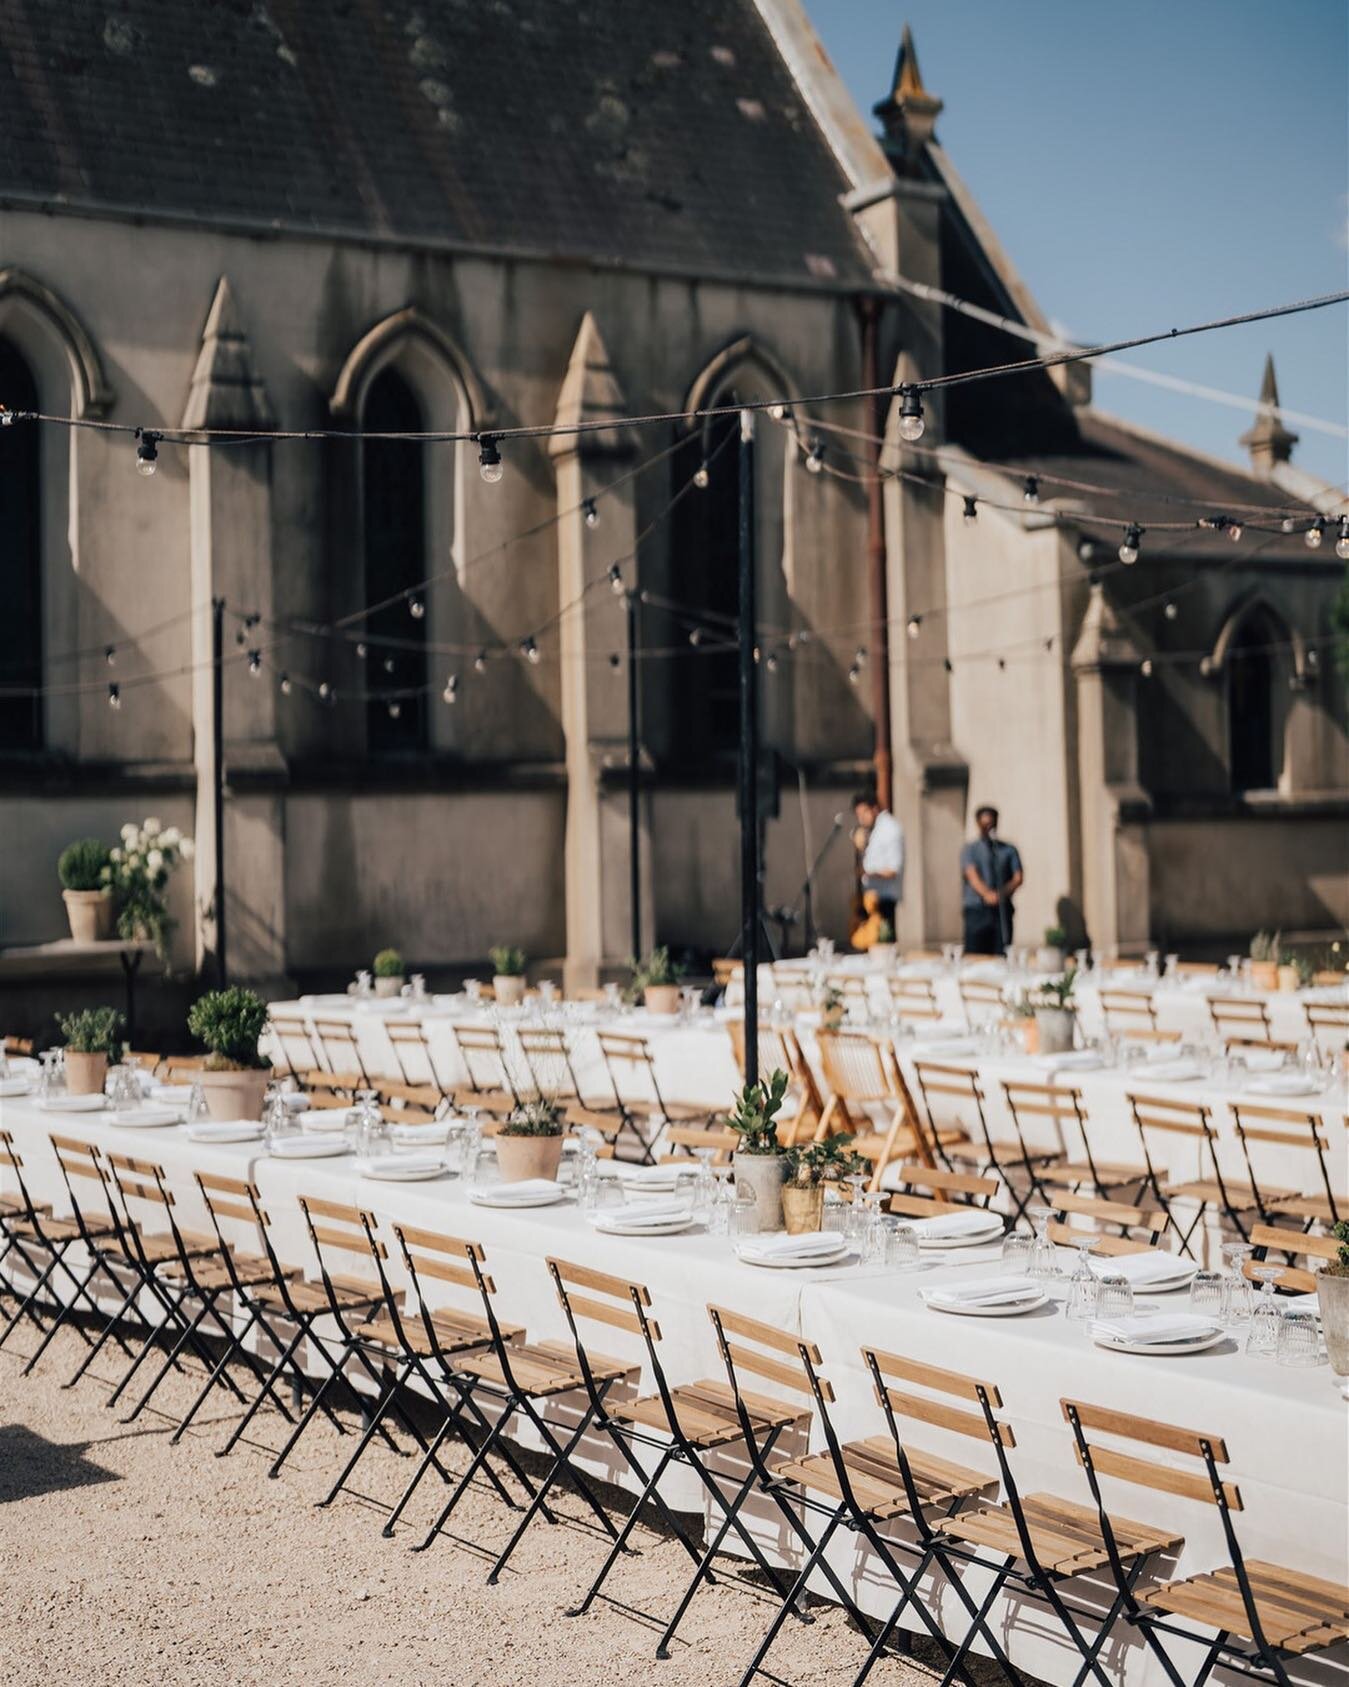 Alfresco wedding goals 🙌
⠀⠀⠀⠀⠀⠀⠀⠀⠀
Spilling across our giant courtyard, this arrangement is perfect for accommodating the entire extended family, or those who simply love the outdoors ☀️ 
⠀⠀⠀⠀⠀⠀⠀⠀⠀
Photographed by @rick_liston